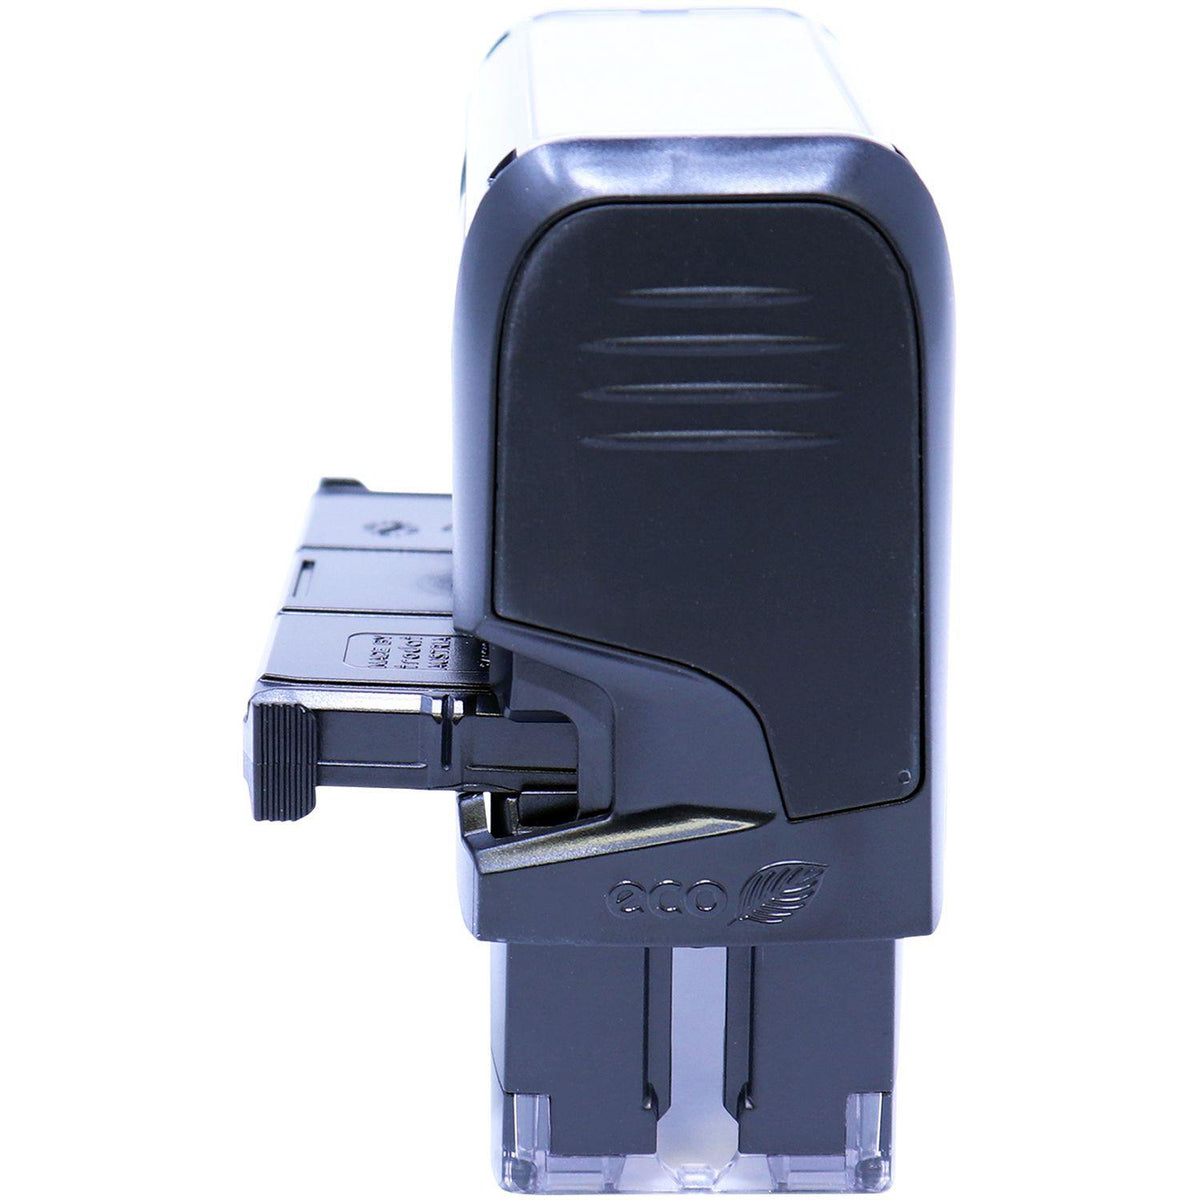 Self Inking Atm Stamp - Engineer Seal Stamps - Brand_Trodat, Impression Size_Small, Stamp Type_Self-Inking Stamp, Type of Use_Finance